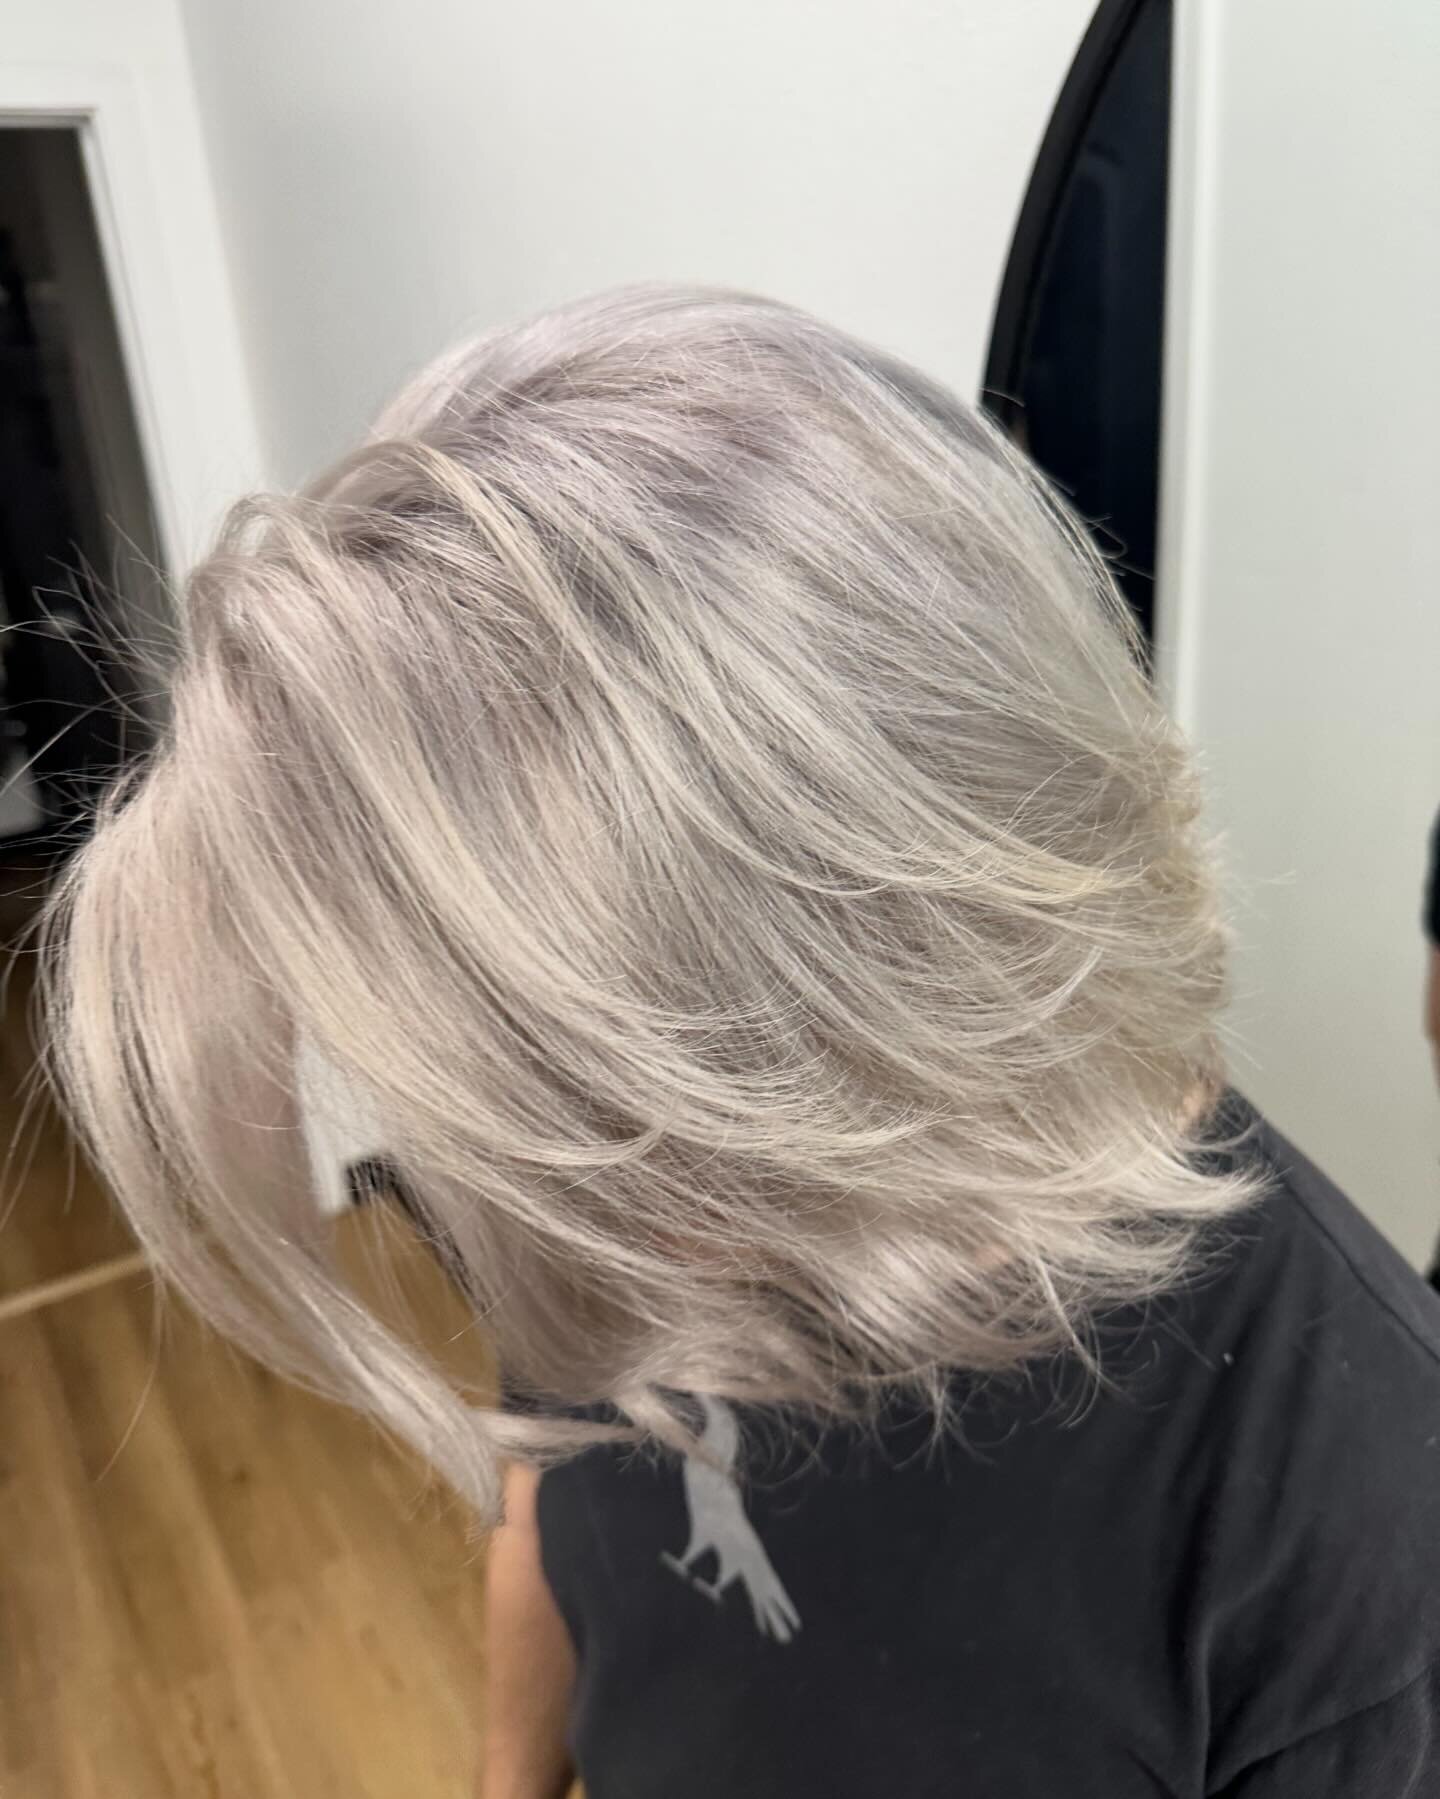 Expectations delivered

This is an atypical result. We did a platinum card and his hair was able to lift evenly to a solid blonde. This was only achievable because the client hadn&rsquo;t colored his hair. When lifting through previous color it can b